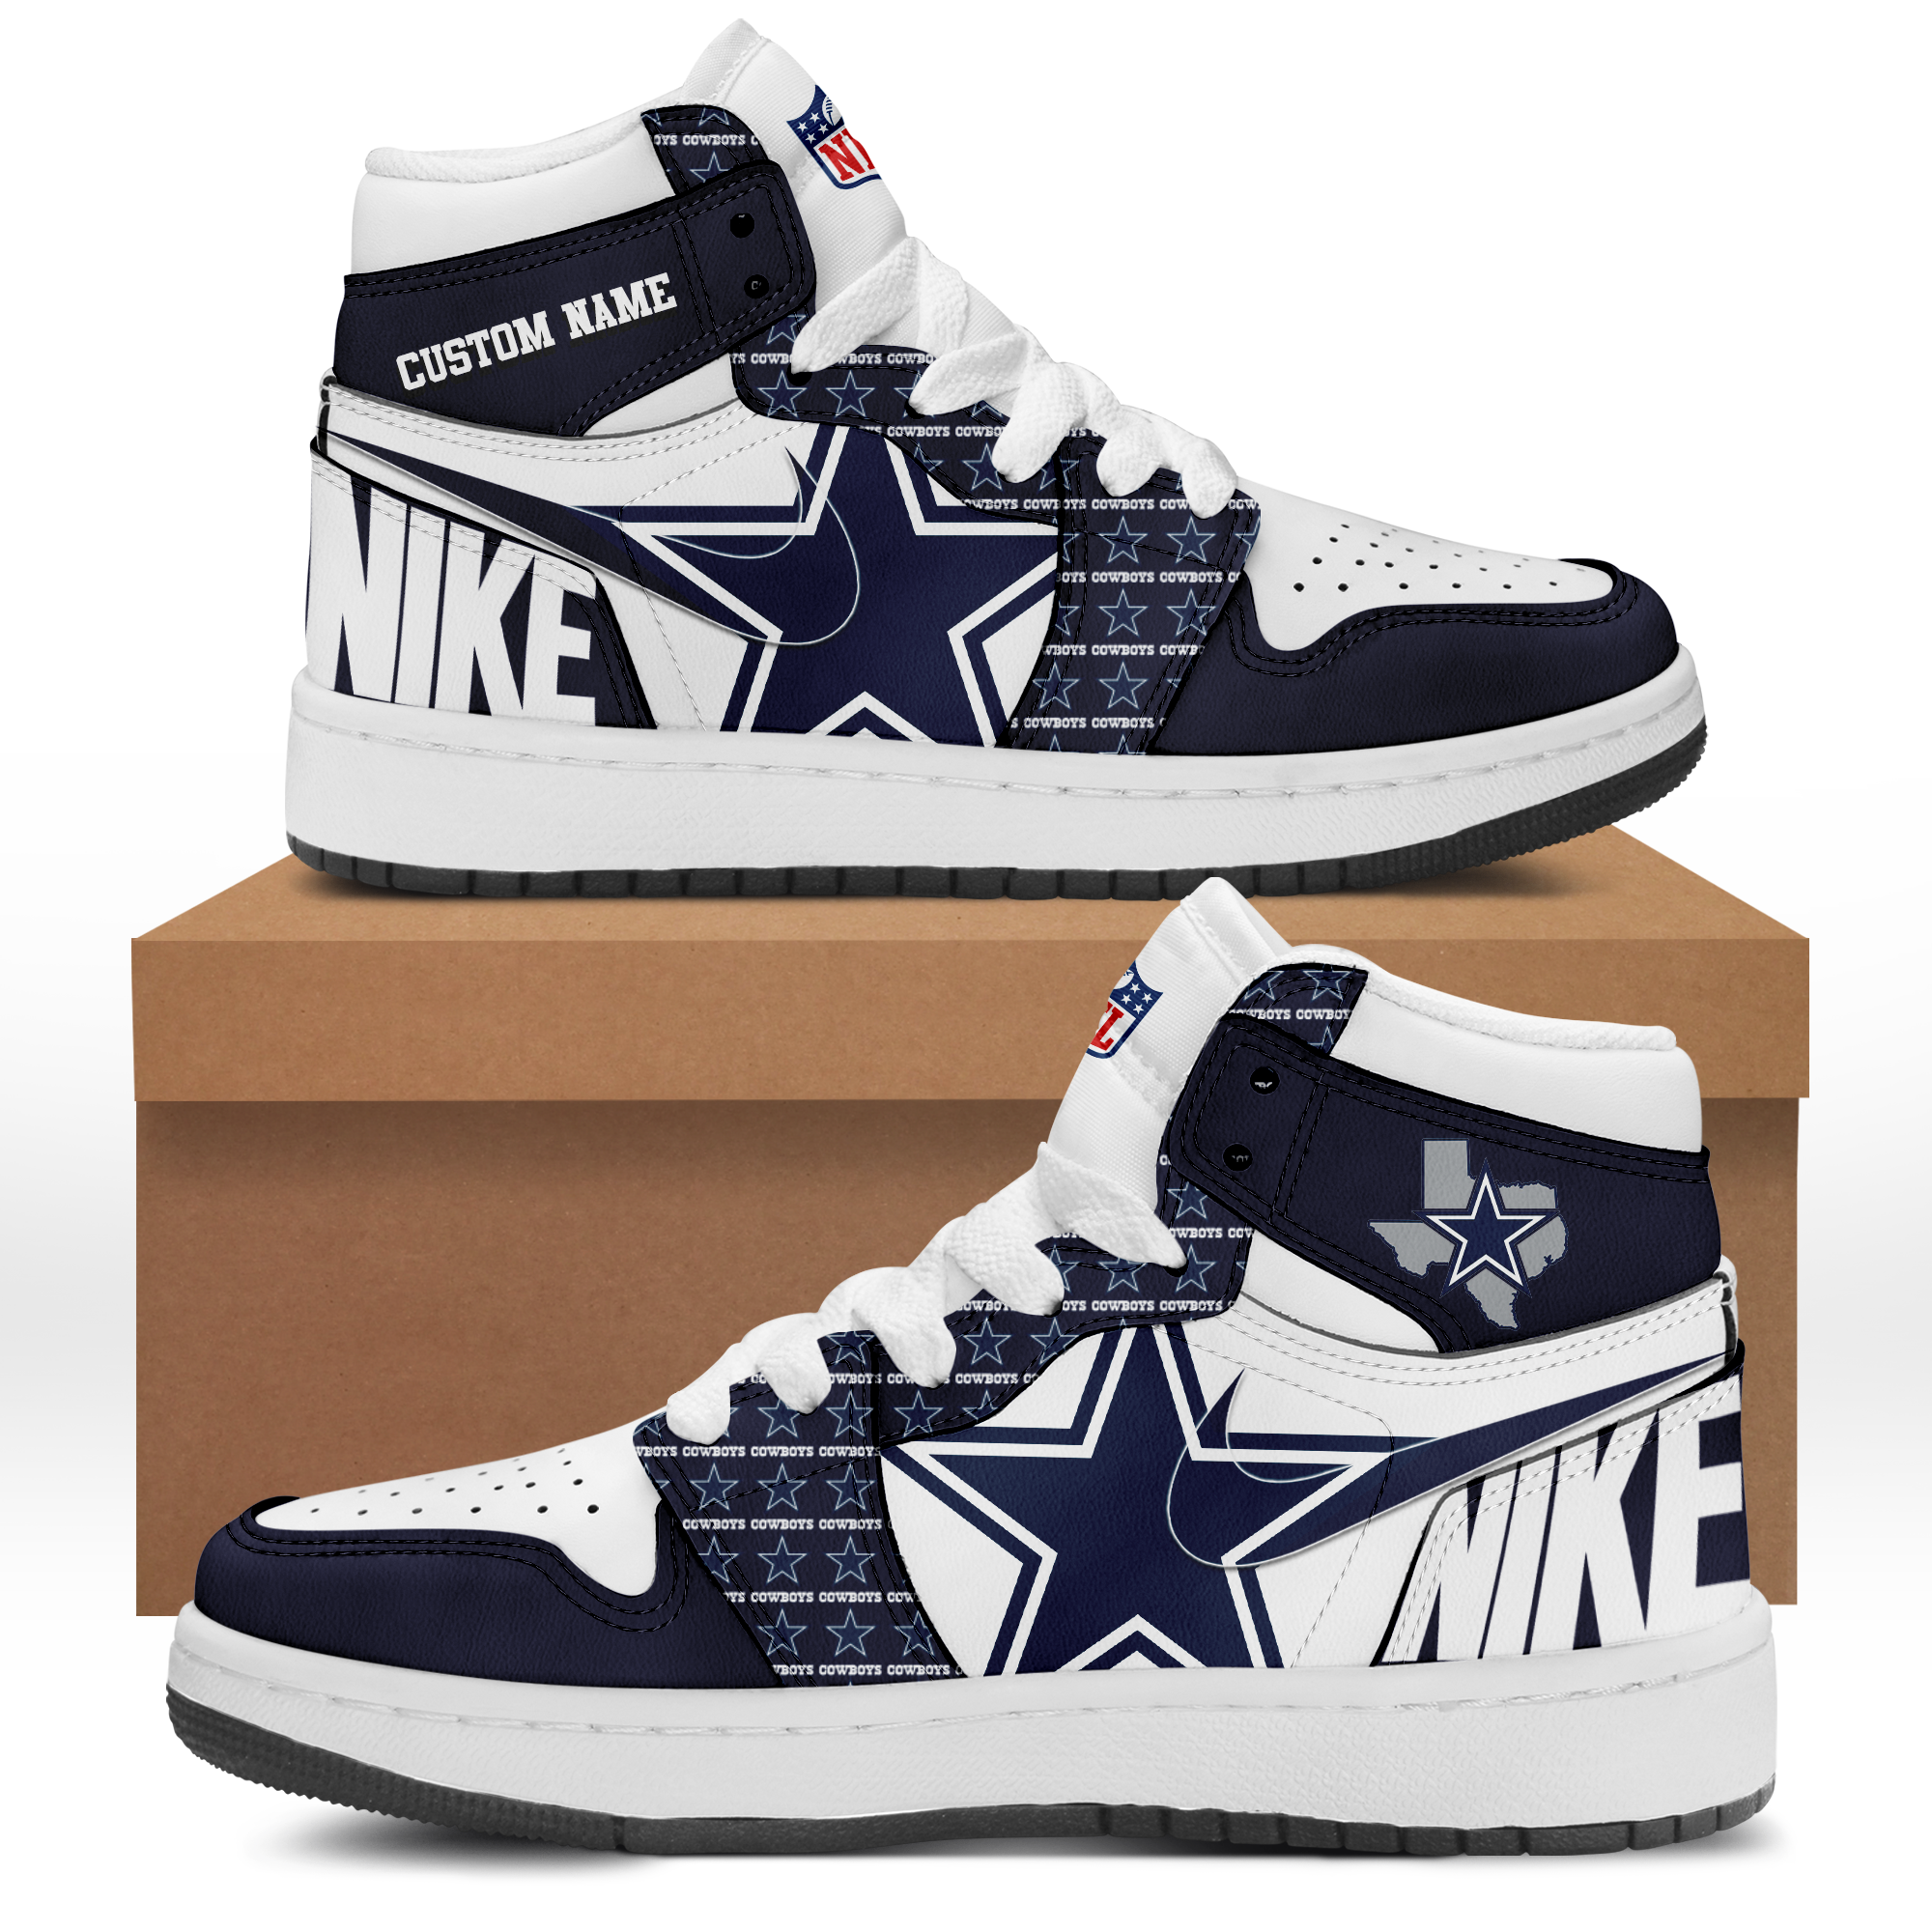 NFL Dallas Cowboy Special Limited Edition Shoes - BTF Store